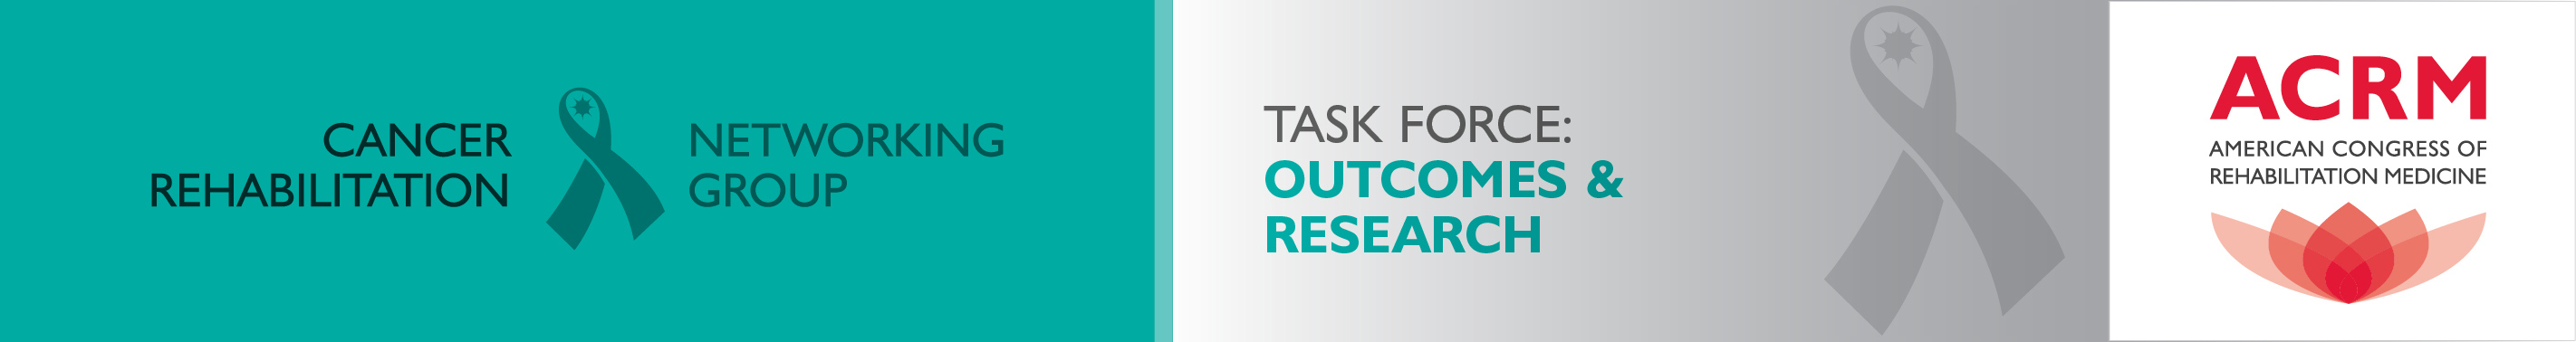 ACRM: Cancer Rehabilitation Networking Group Outcomes & Research Task Force